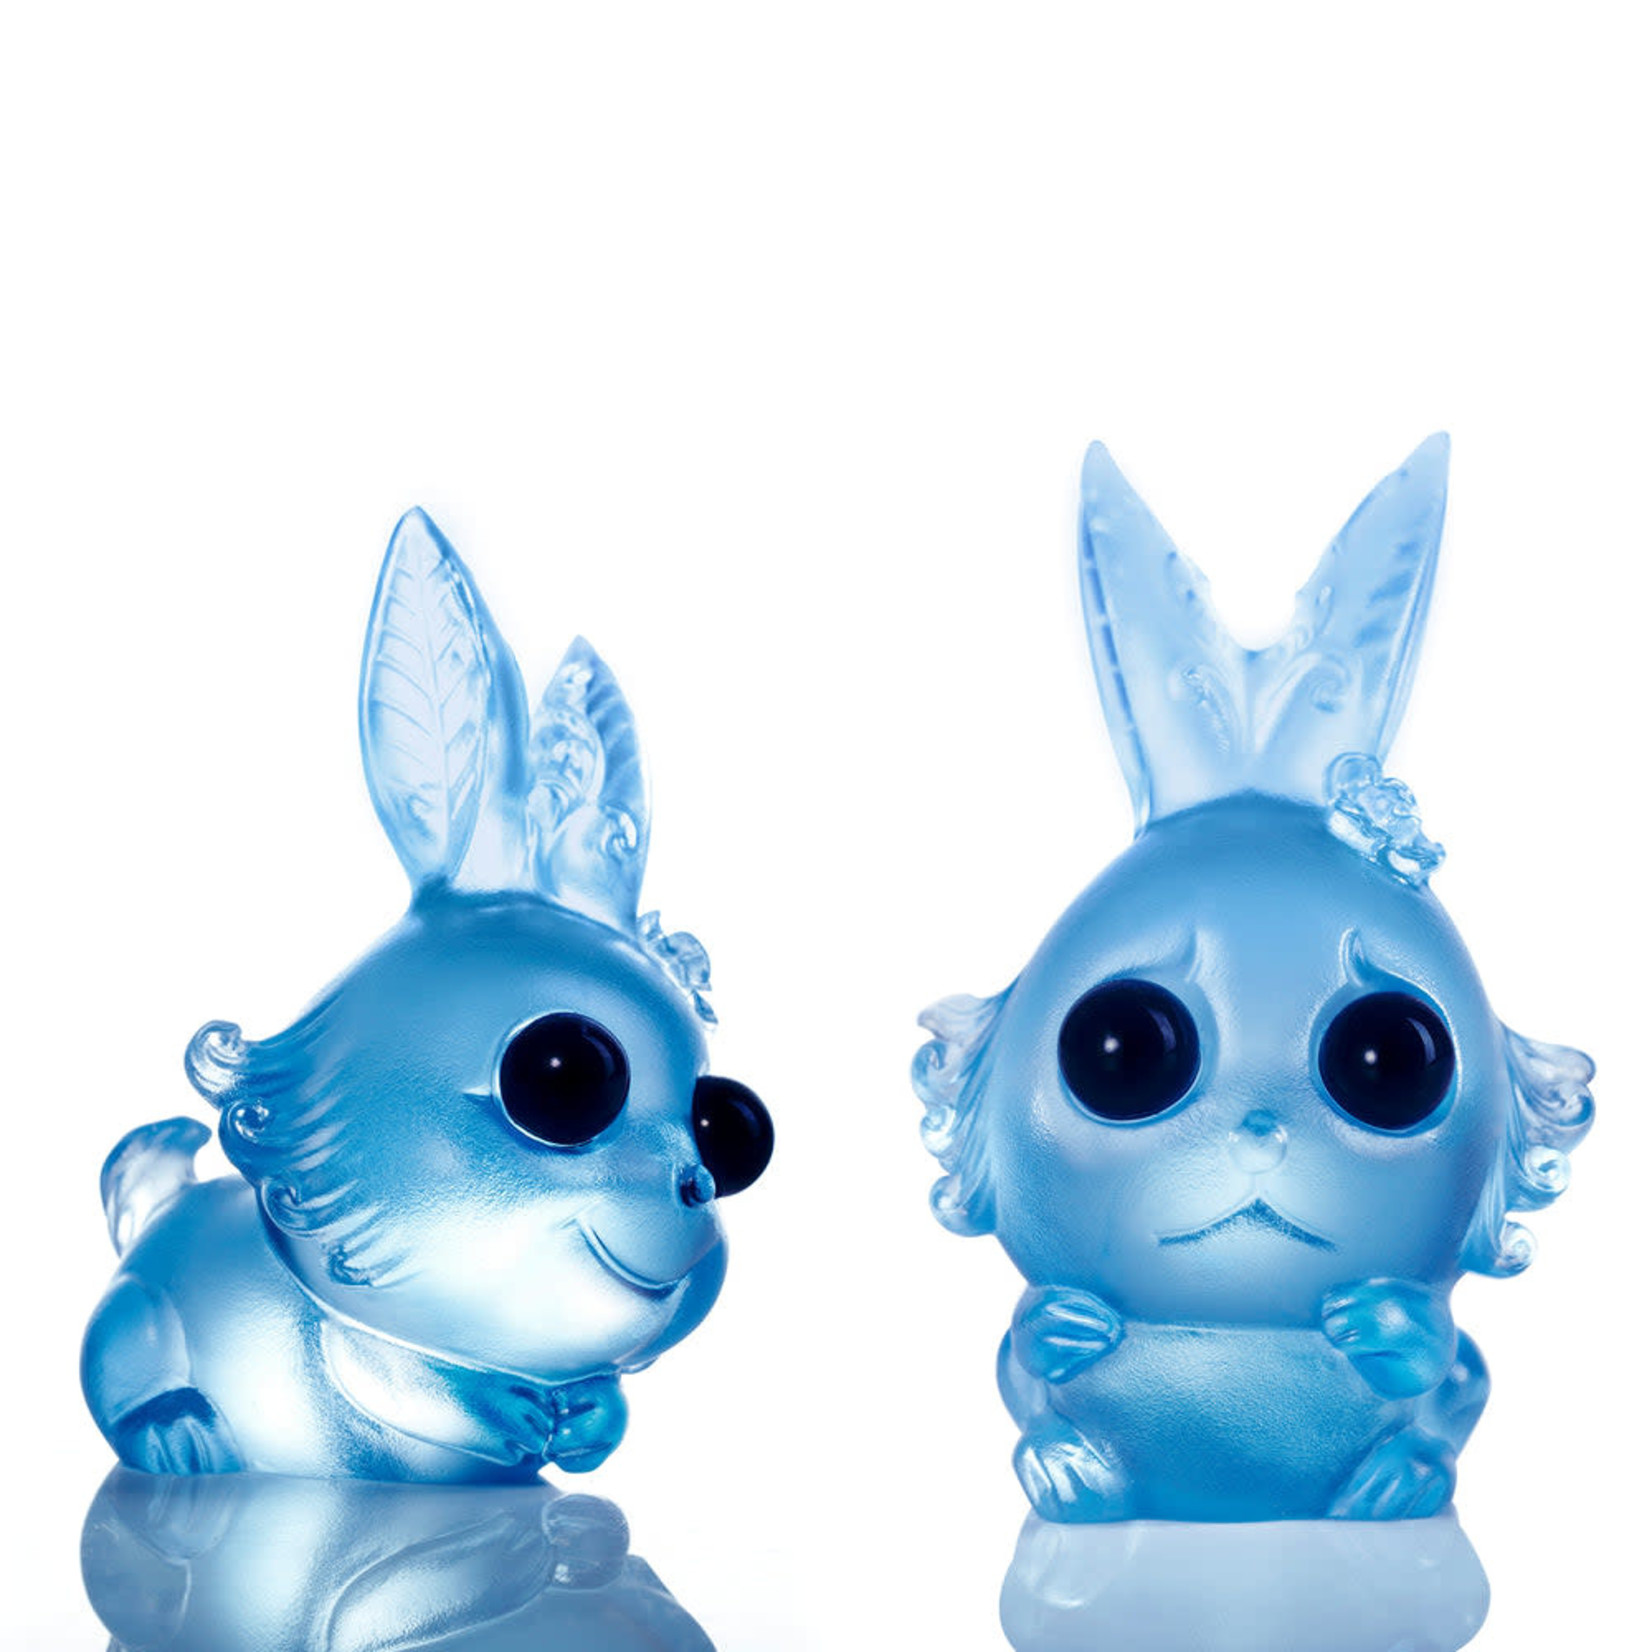 LIULI Crystal Art Chinese Year of the Rabbit Crystal Sculpture, One and the Same- Brave Bunny